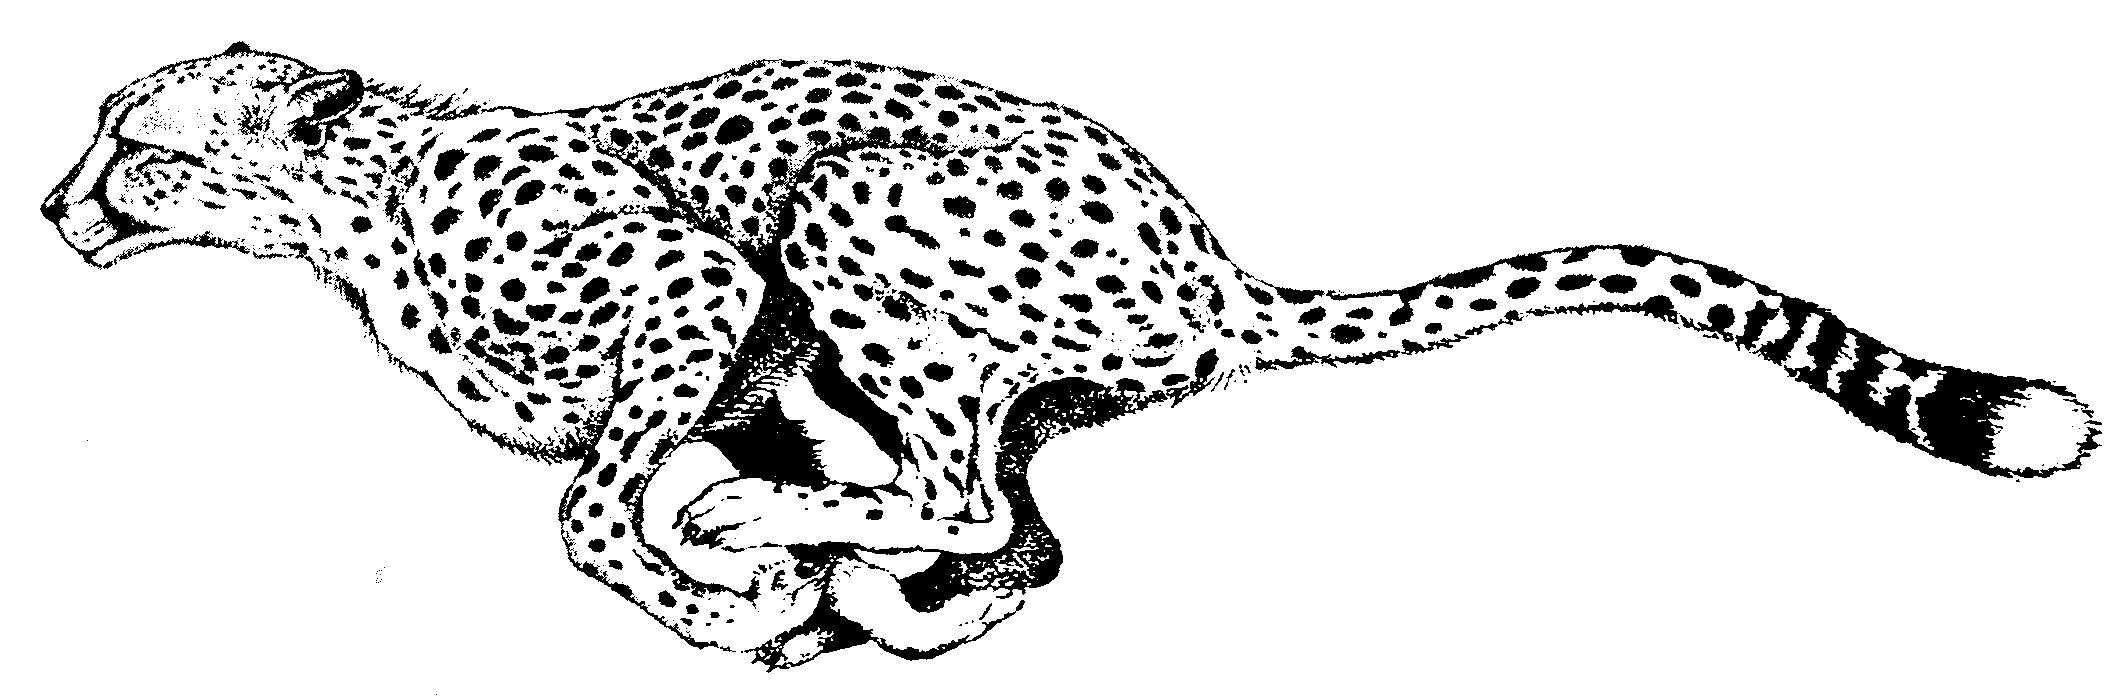 cheetah pictures to print printable cheetah coloring pages for kids cool2bkids print pictures to cheetah 